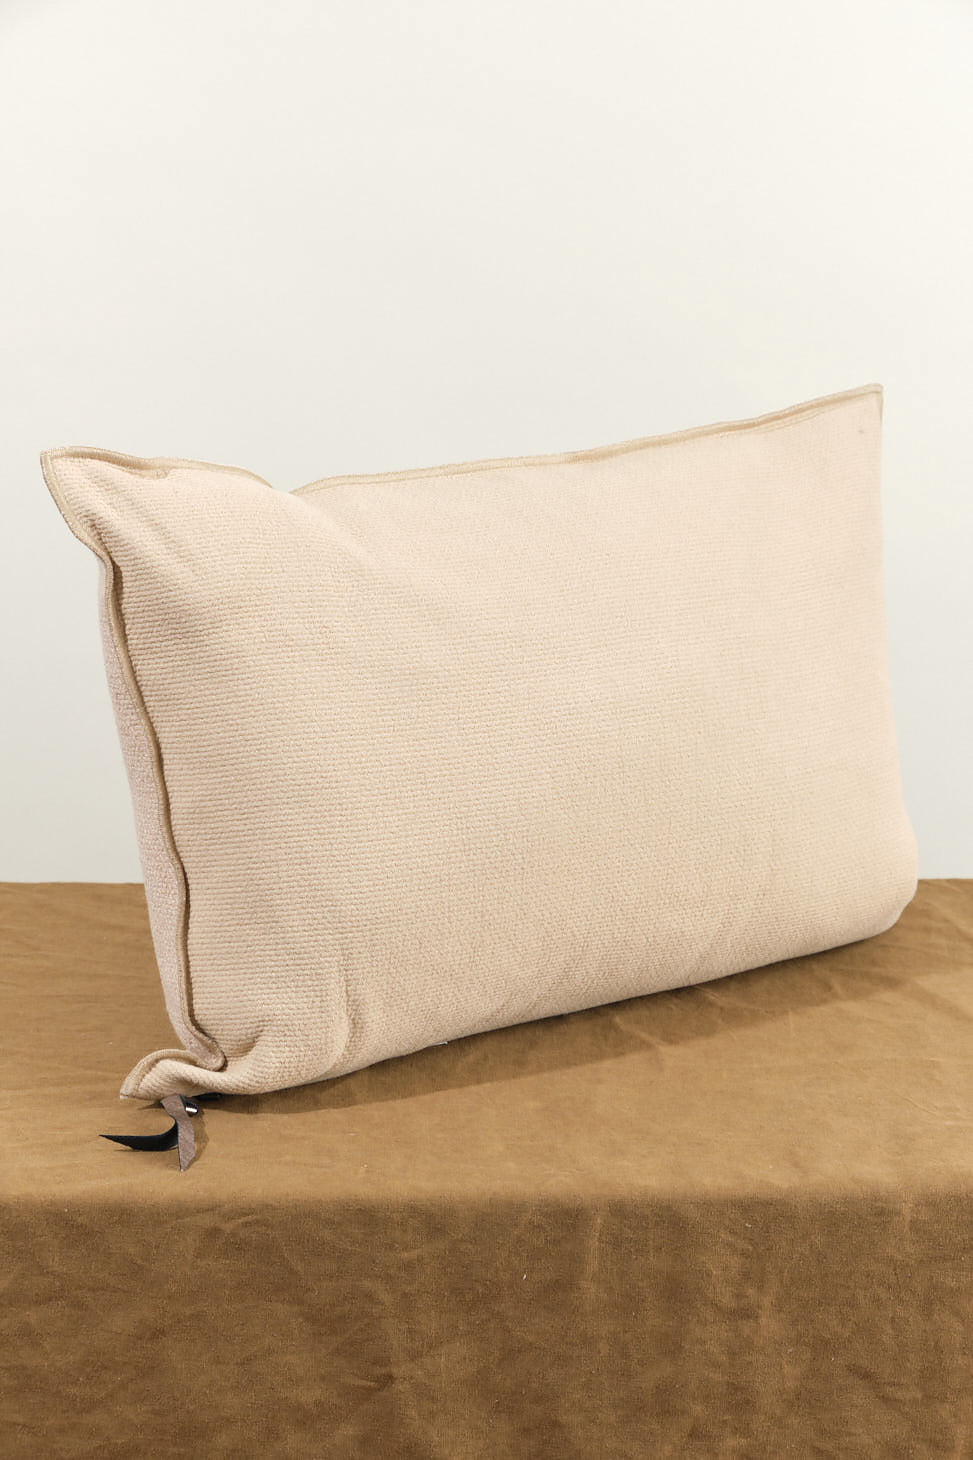 16" X 24" Canvas Vice Versa Cushion in Nude on table